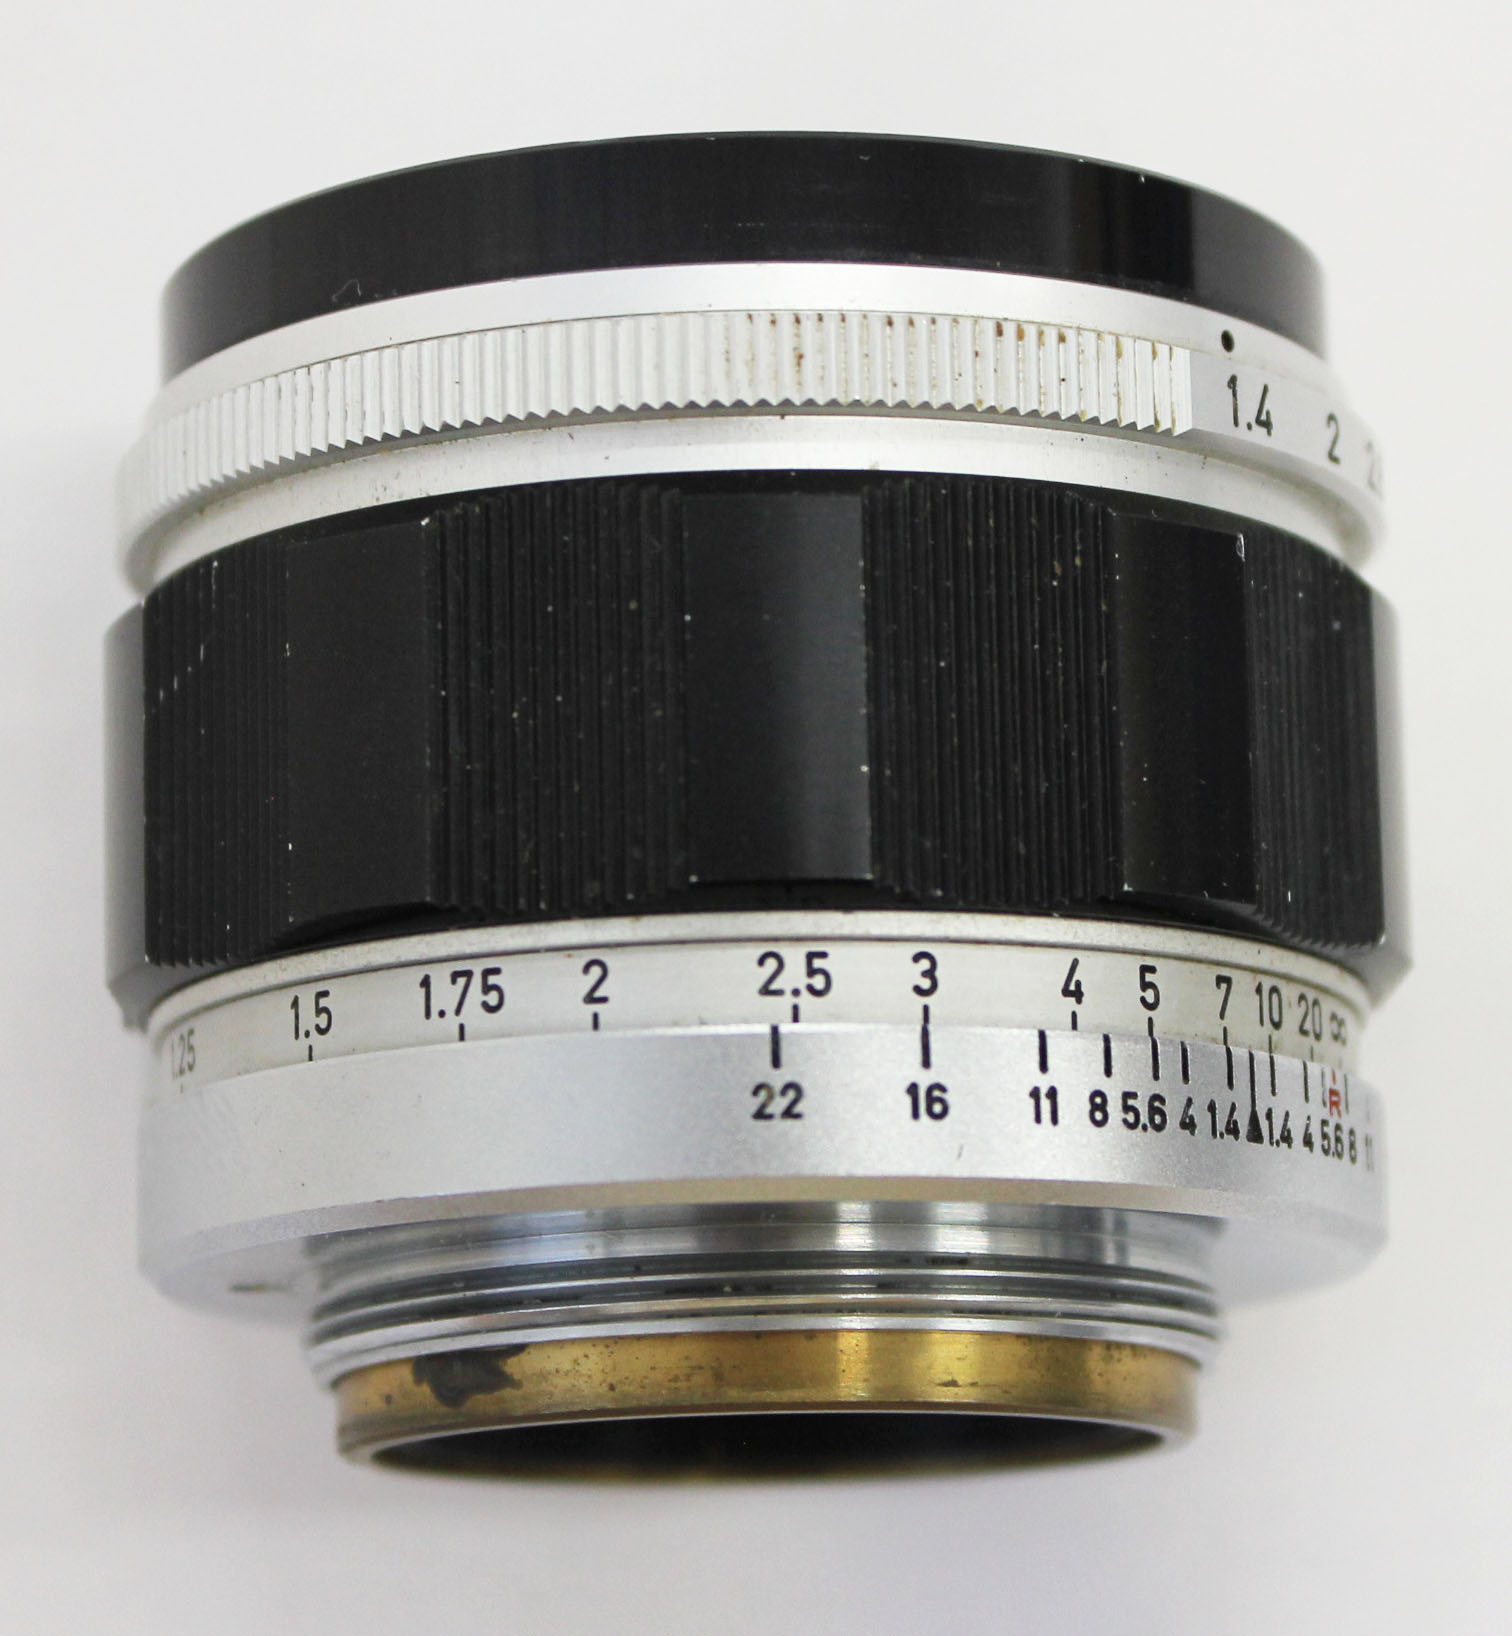 Canon 50mm F/1.4 L39 LTM Leica Screw Mount Lens from Japan (C1905